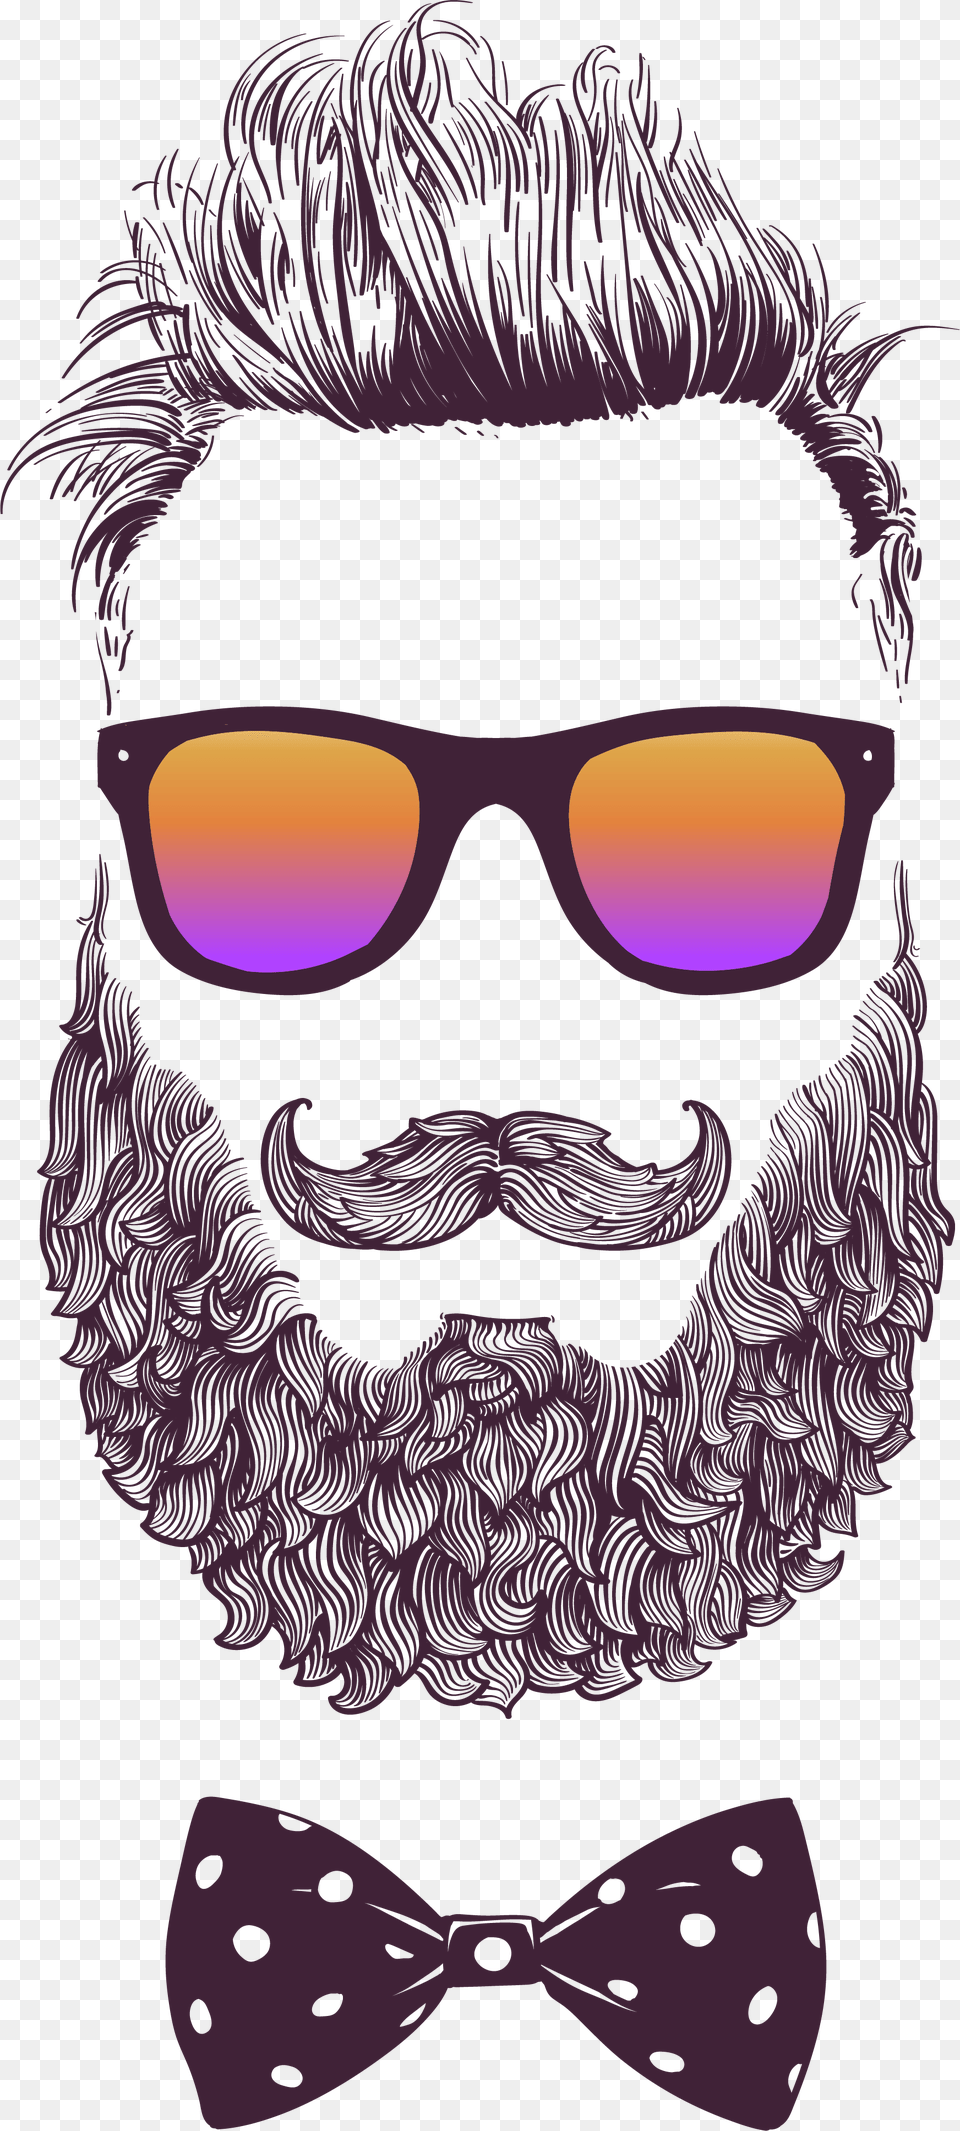 Fashion Sunglasses Illustration Royalty Vector Male Fashion Illustration Sunglasses, Accessories, Face, Head, Person Free Png Download